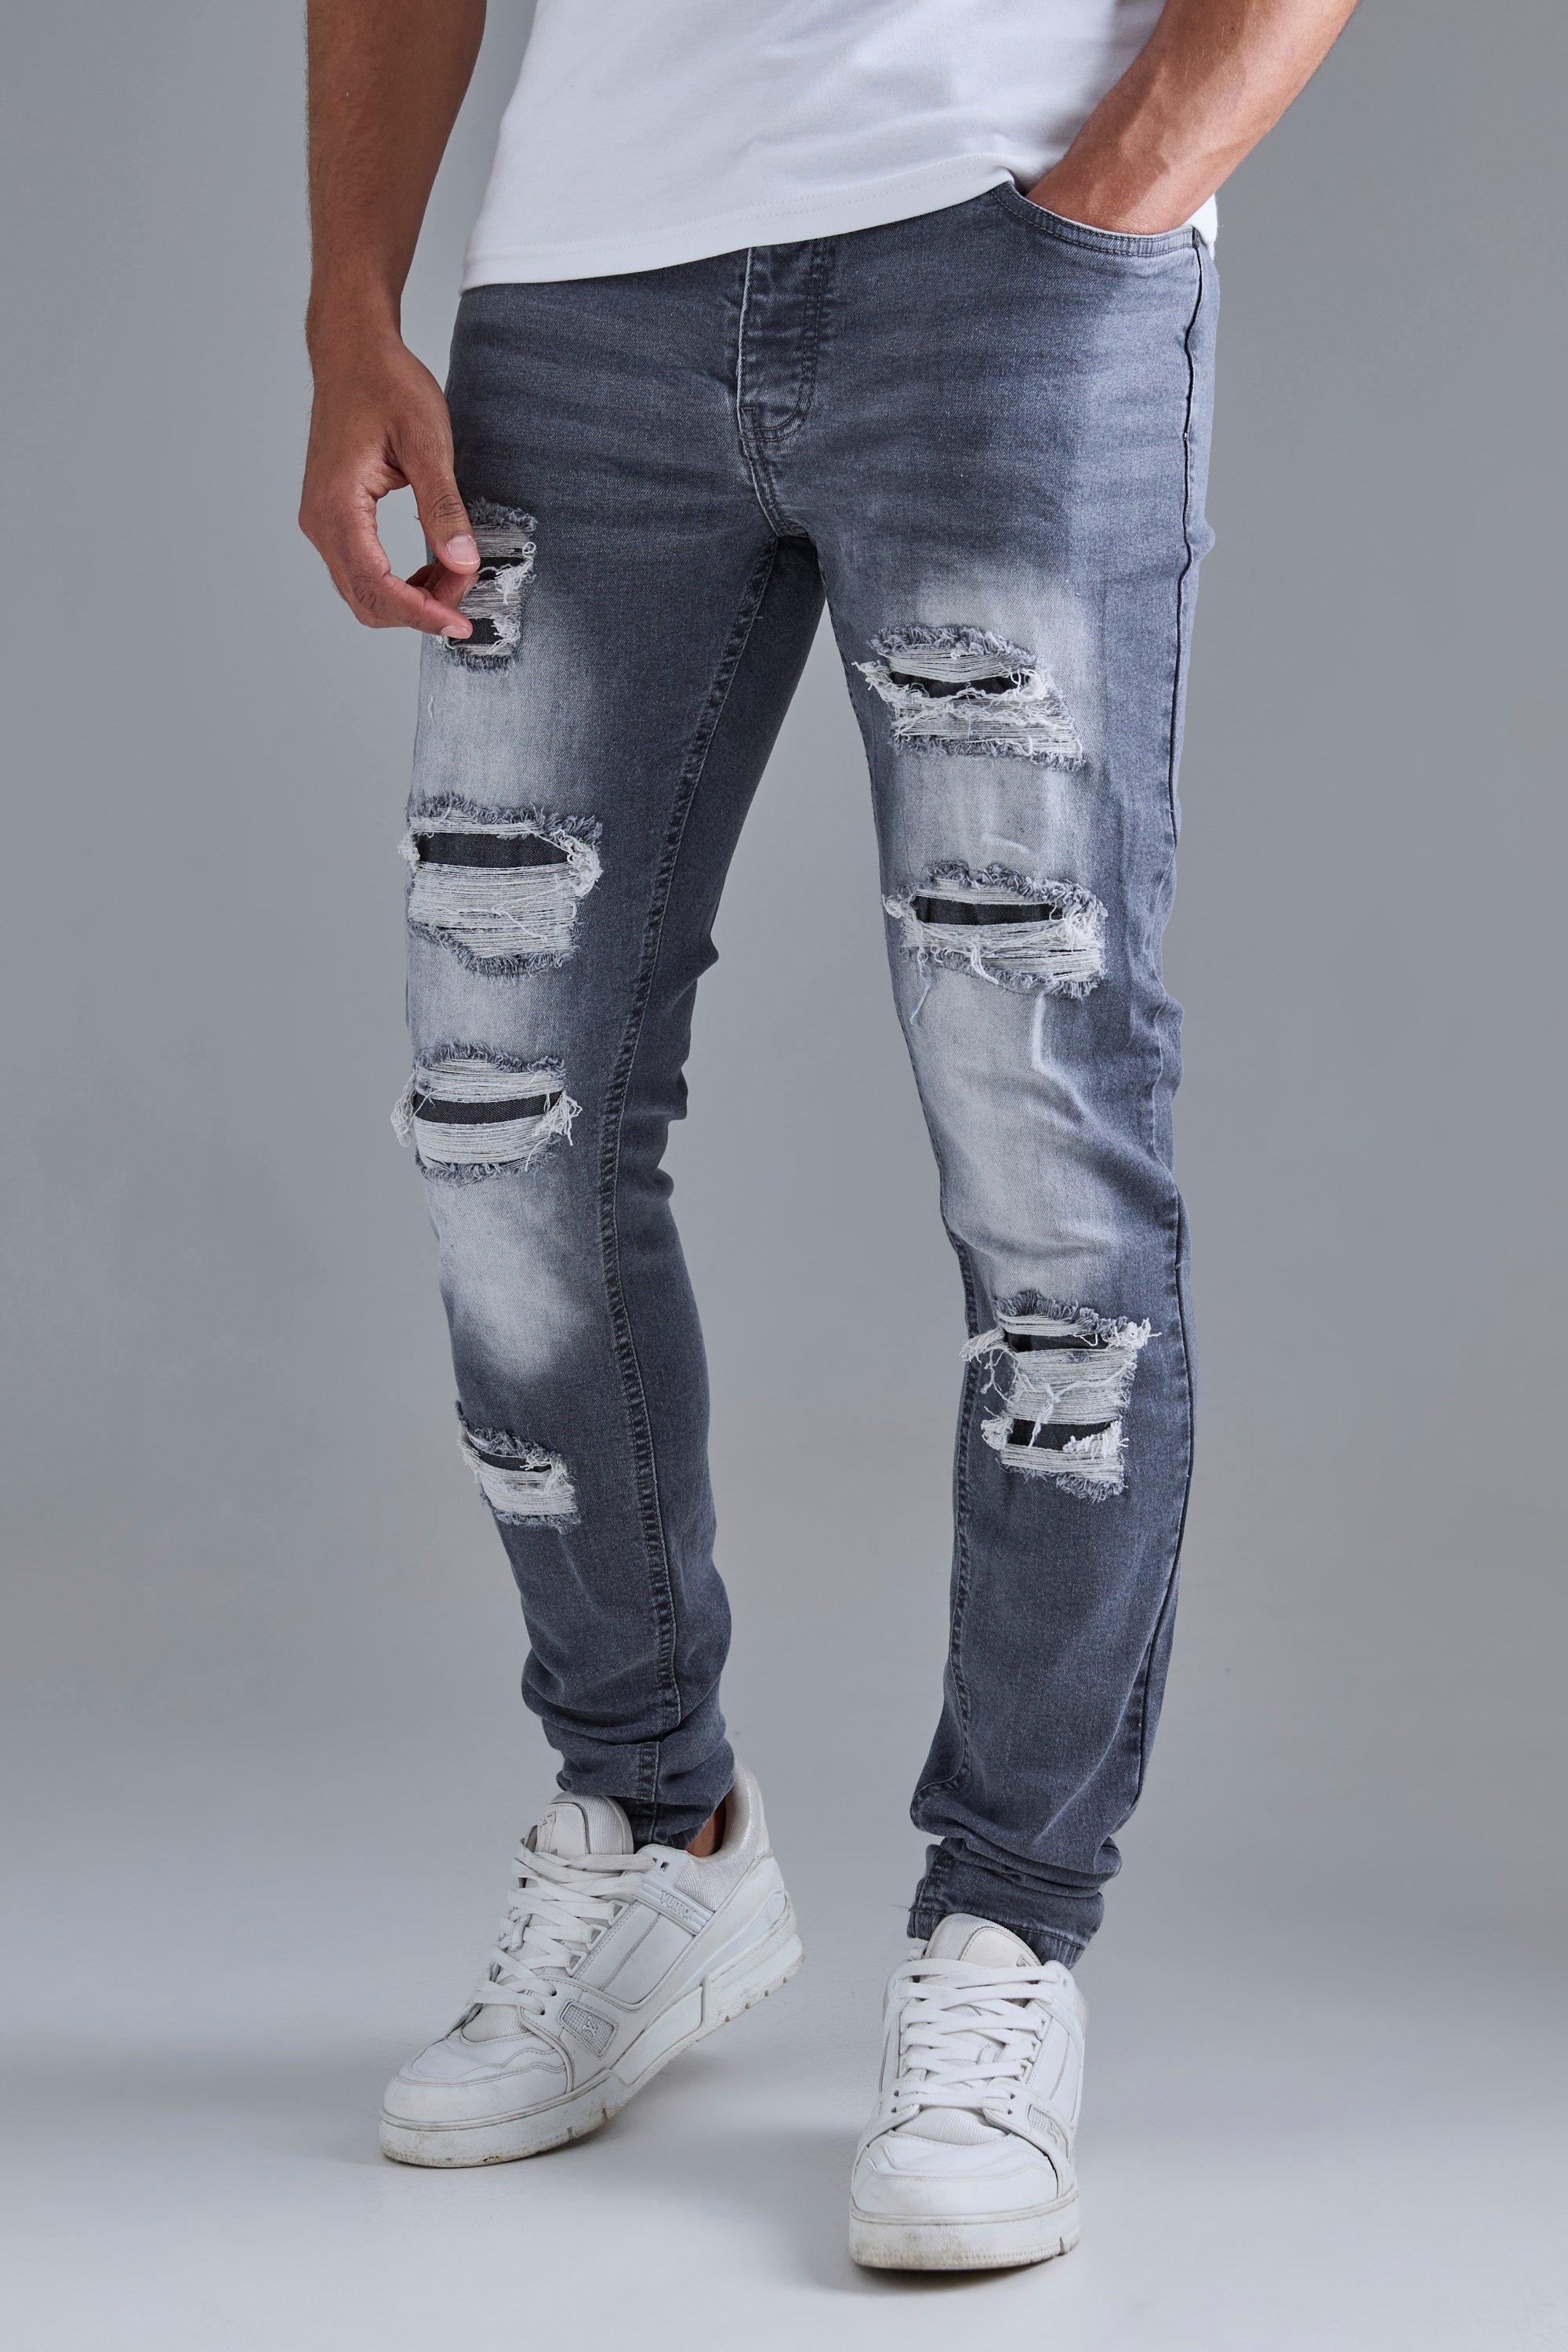 Image of Skinny Stacked Distressed Ripped Jeans In Grey, Grigio